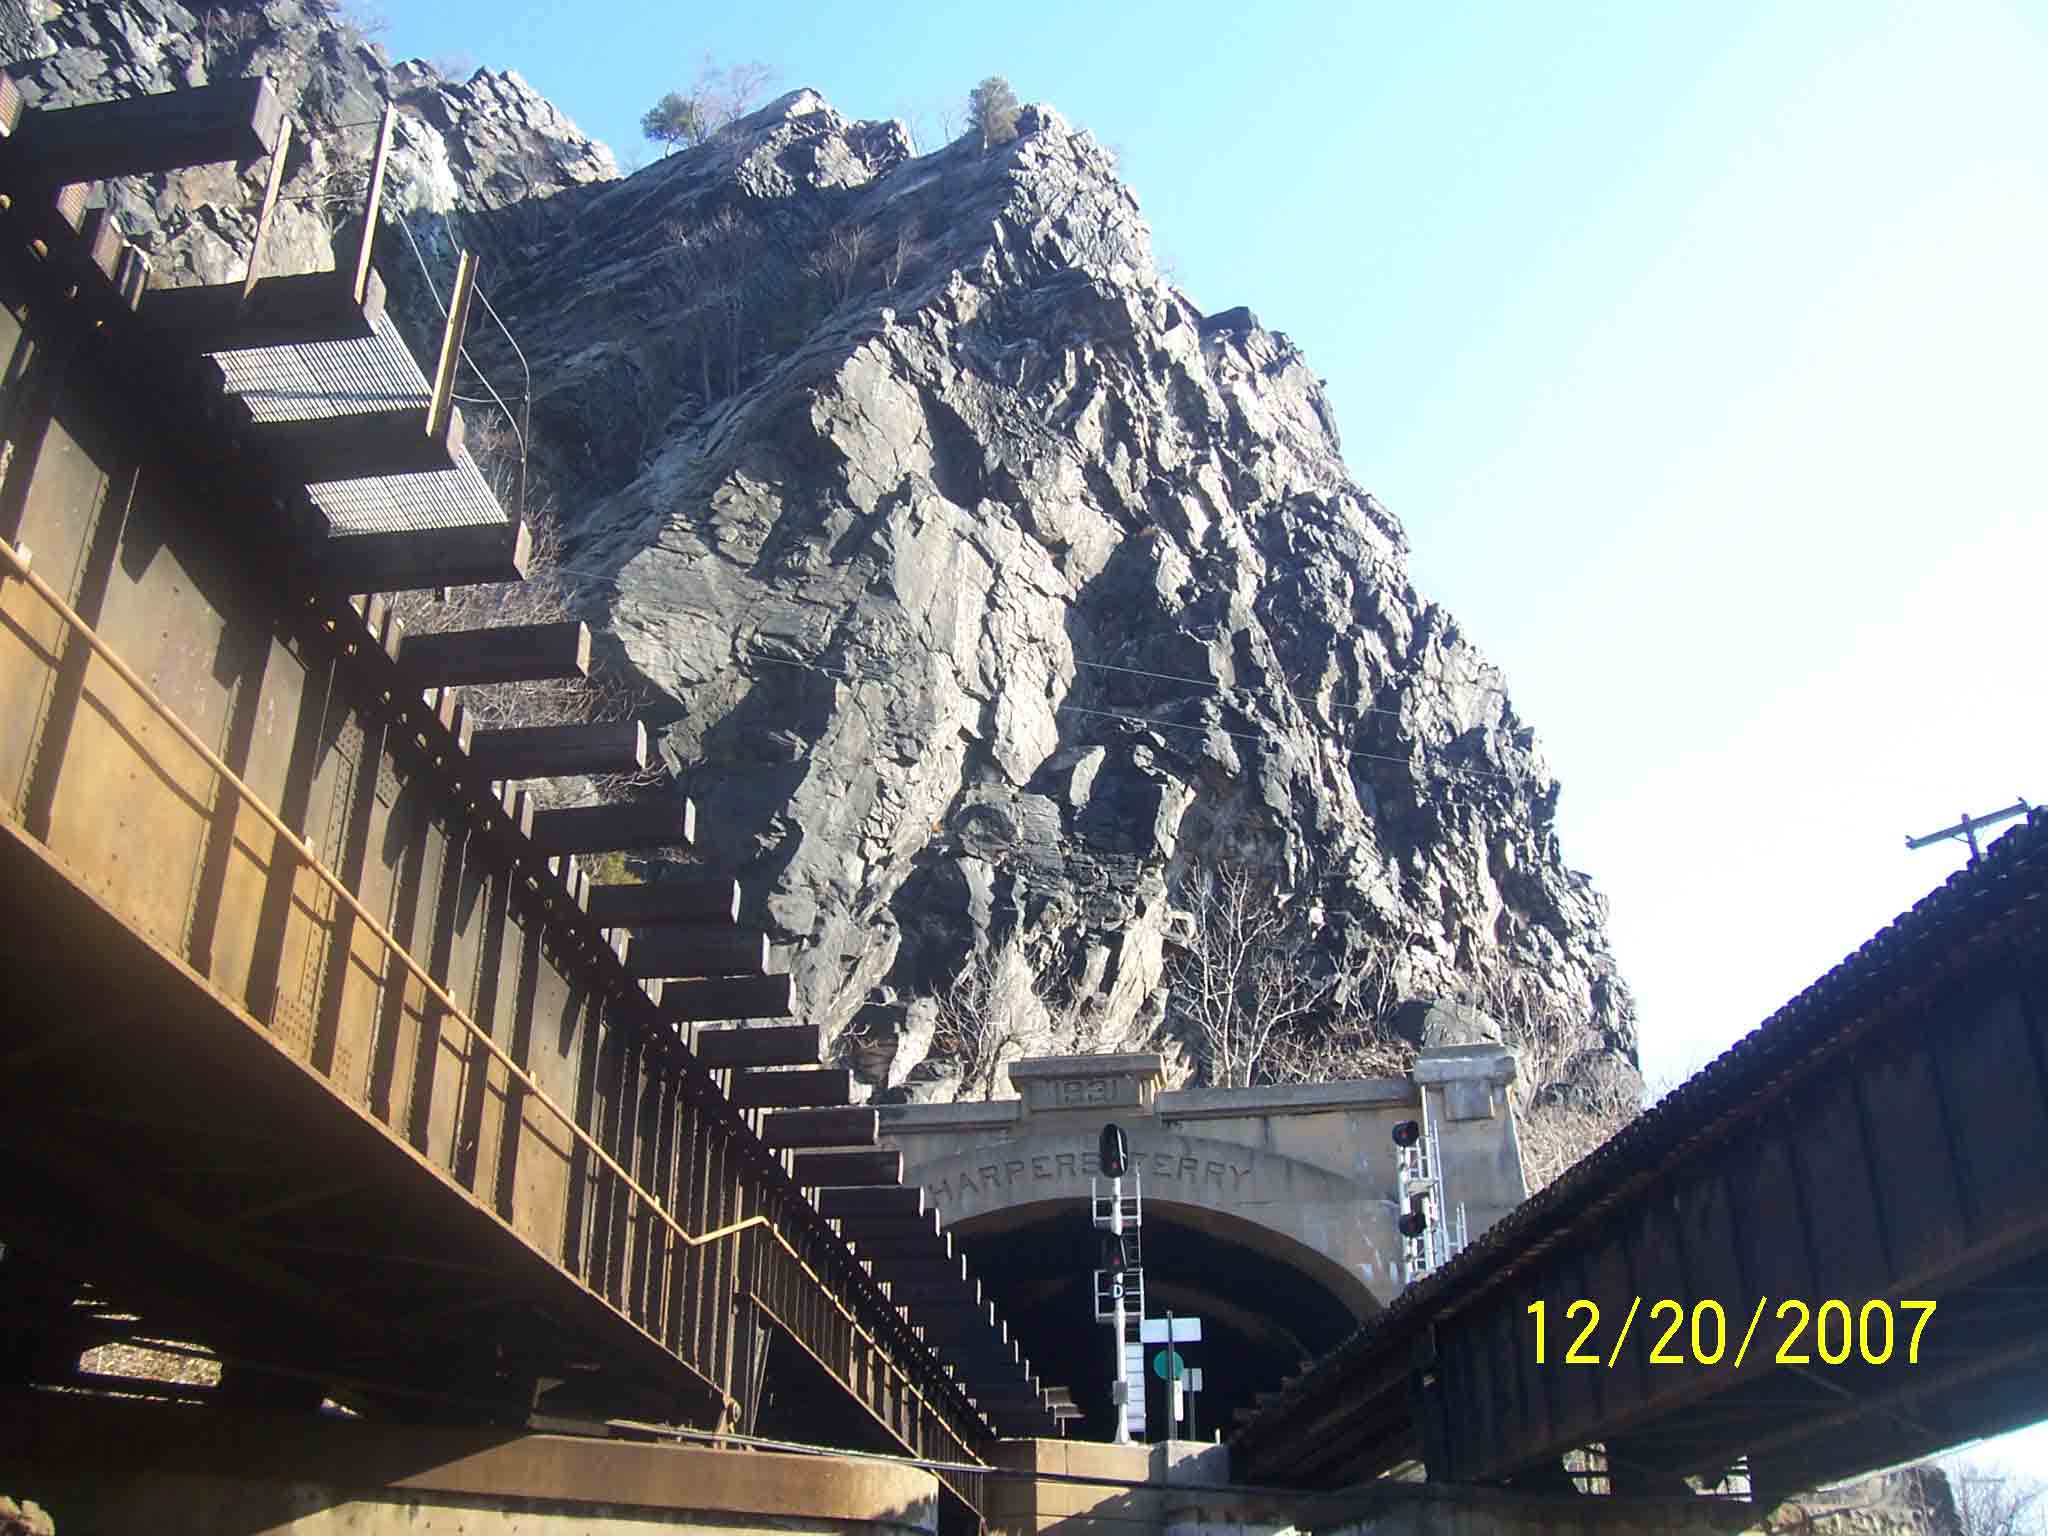 mm 3.1 - View from stairs on the bridge leaving MD crossing into Harpers Ferry.  Courtesy at_md_rob@yahoo.com